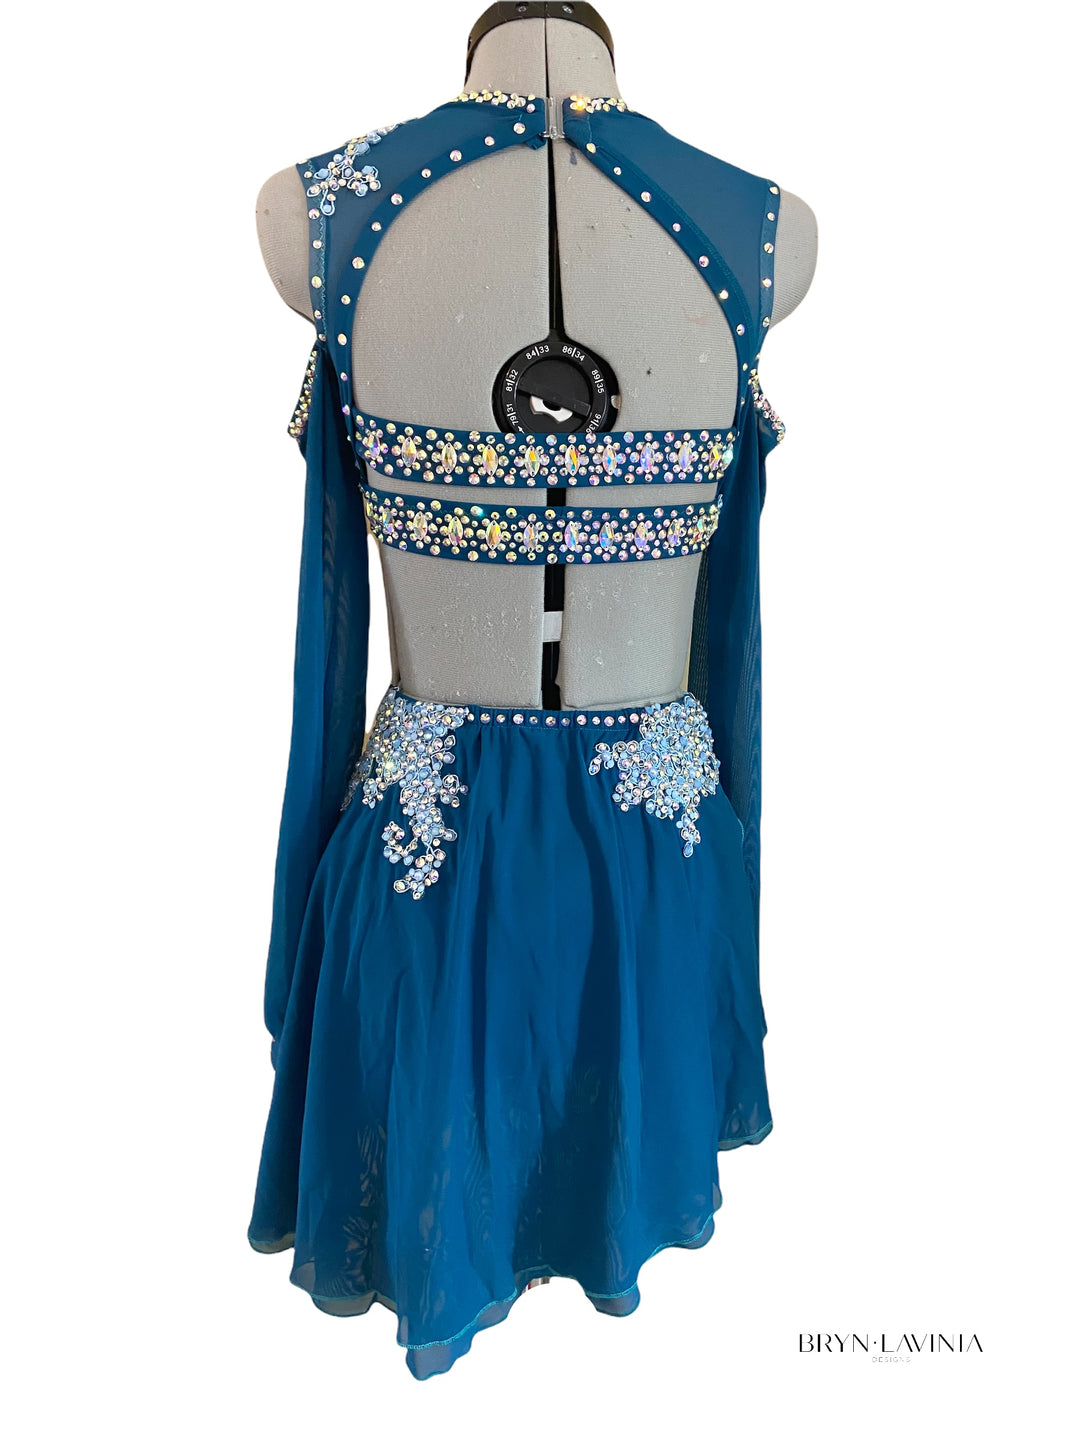 NEW AXS teal/light blue lyrical/contemporary costume